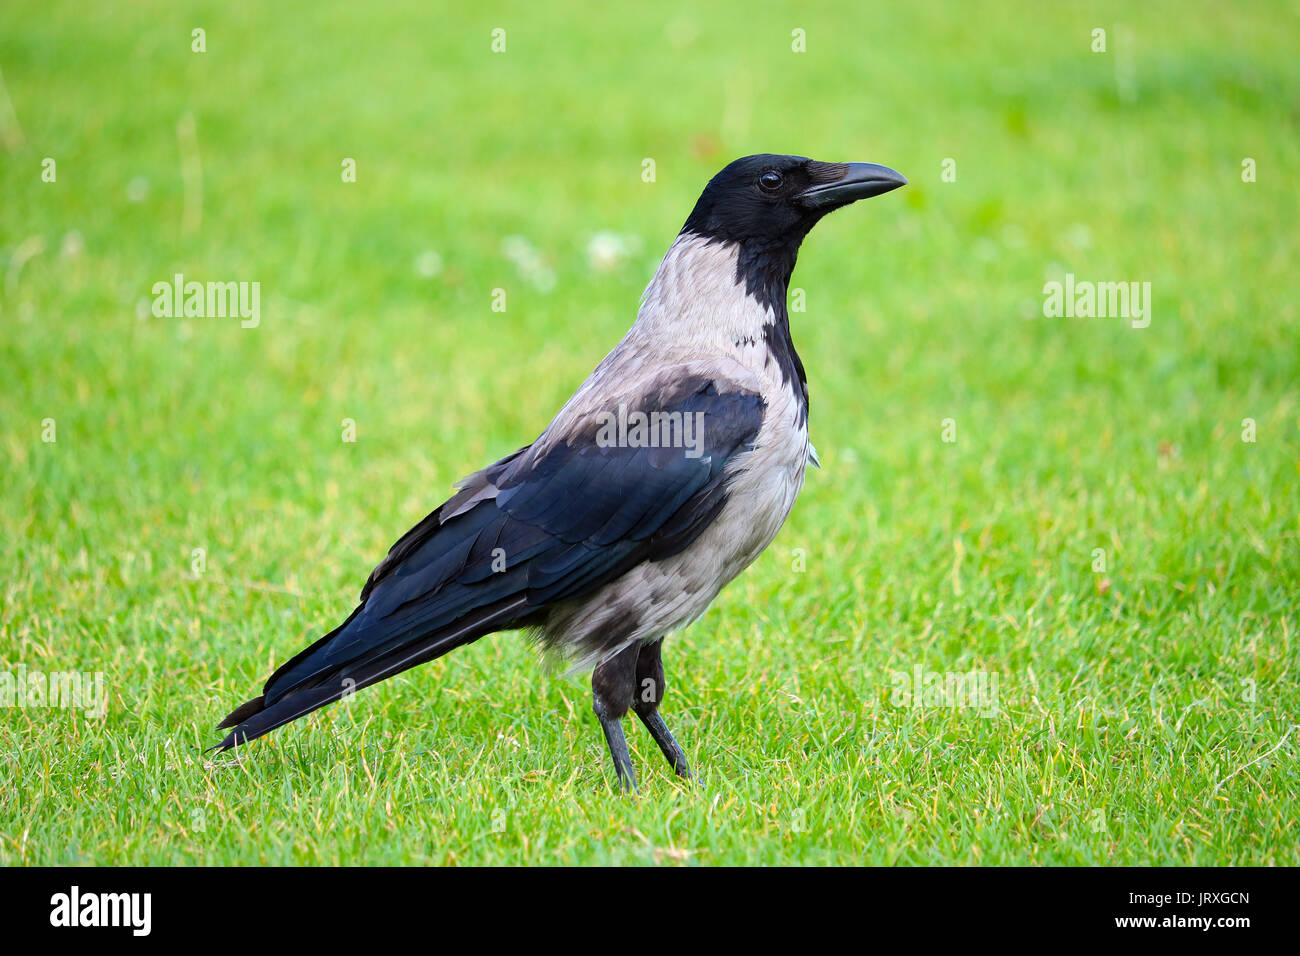 crow bird sitting on a green summer meadow in a park in berlin Stock Photo